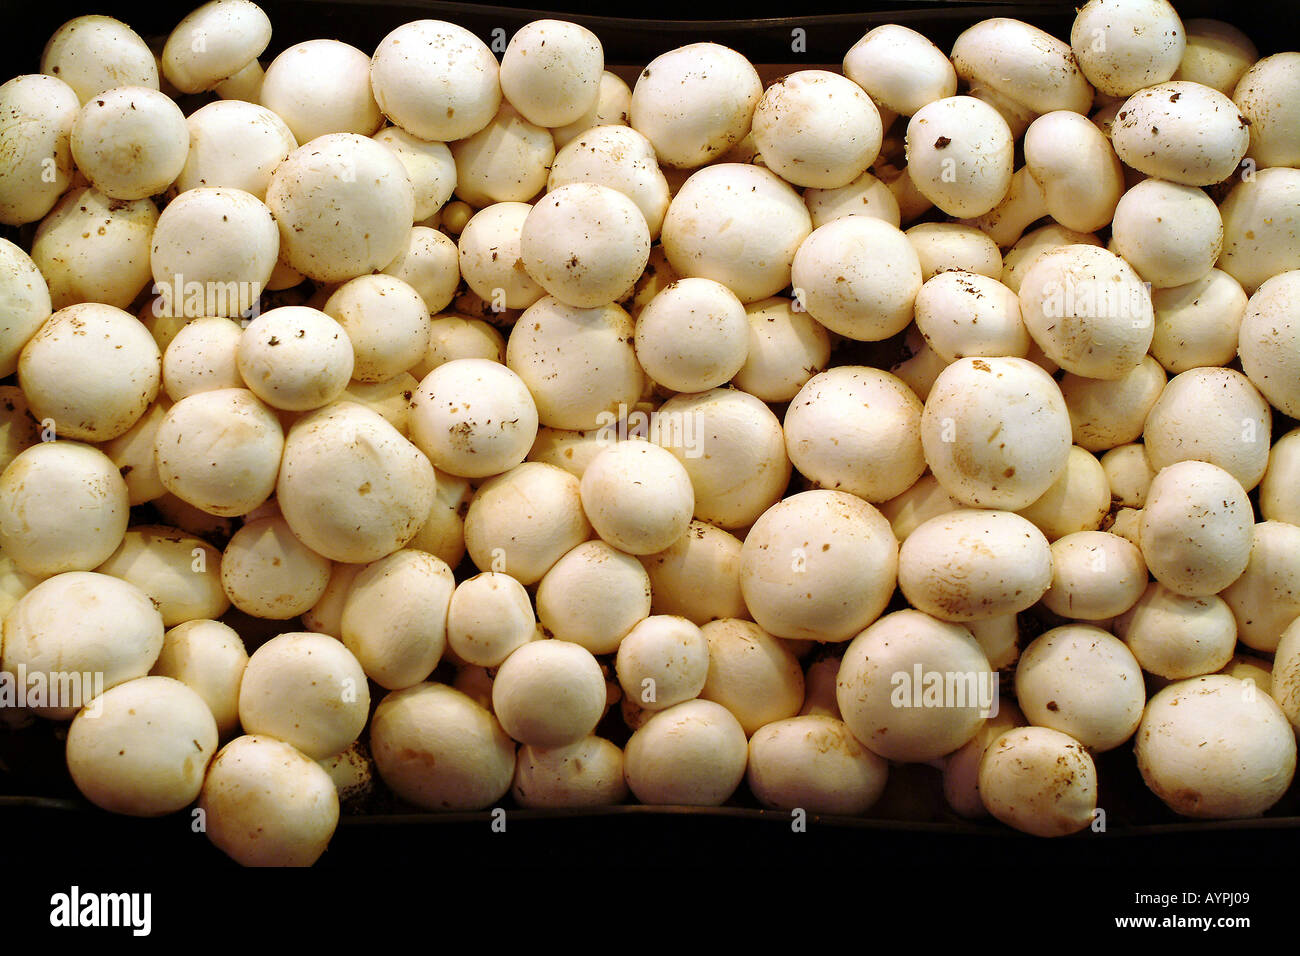 Large group of mushrooms collected at one place Stock Photo